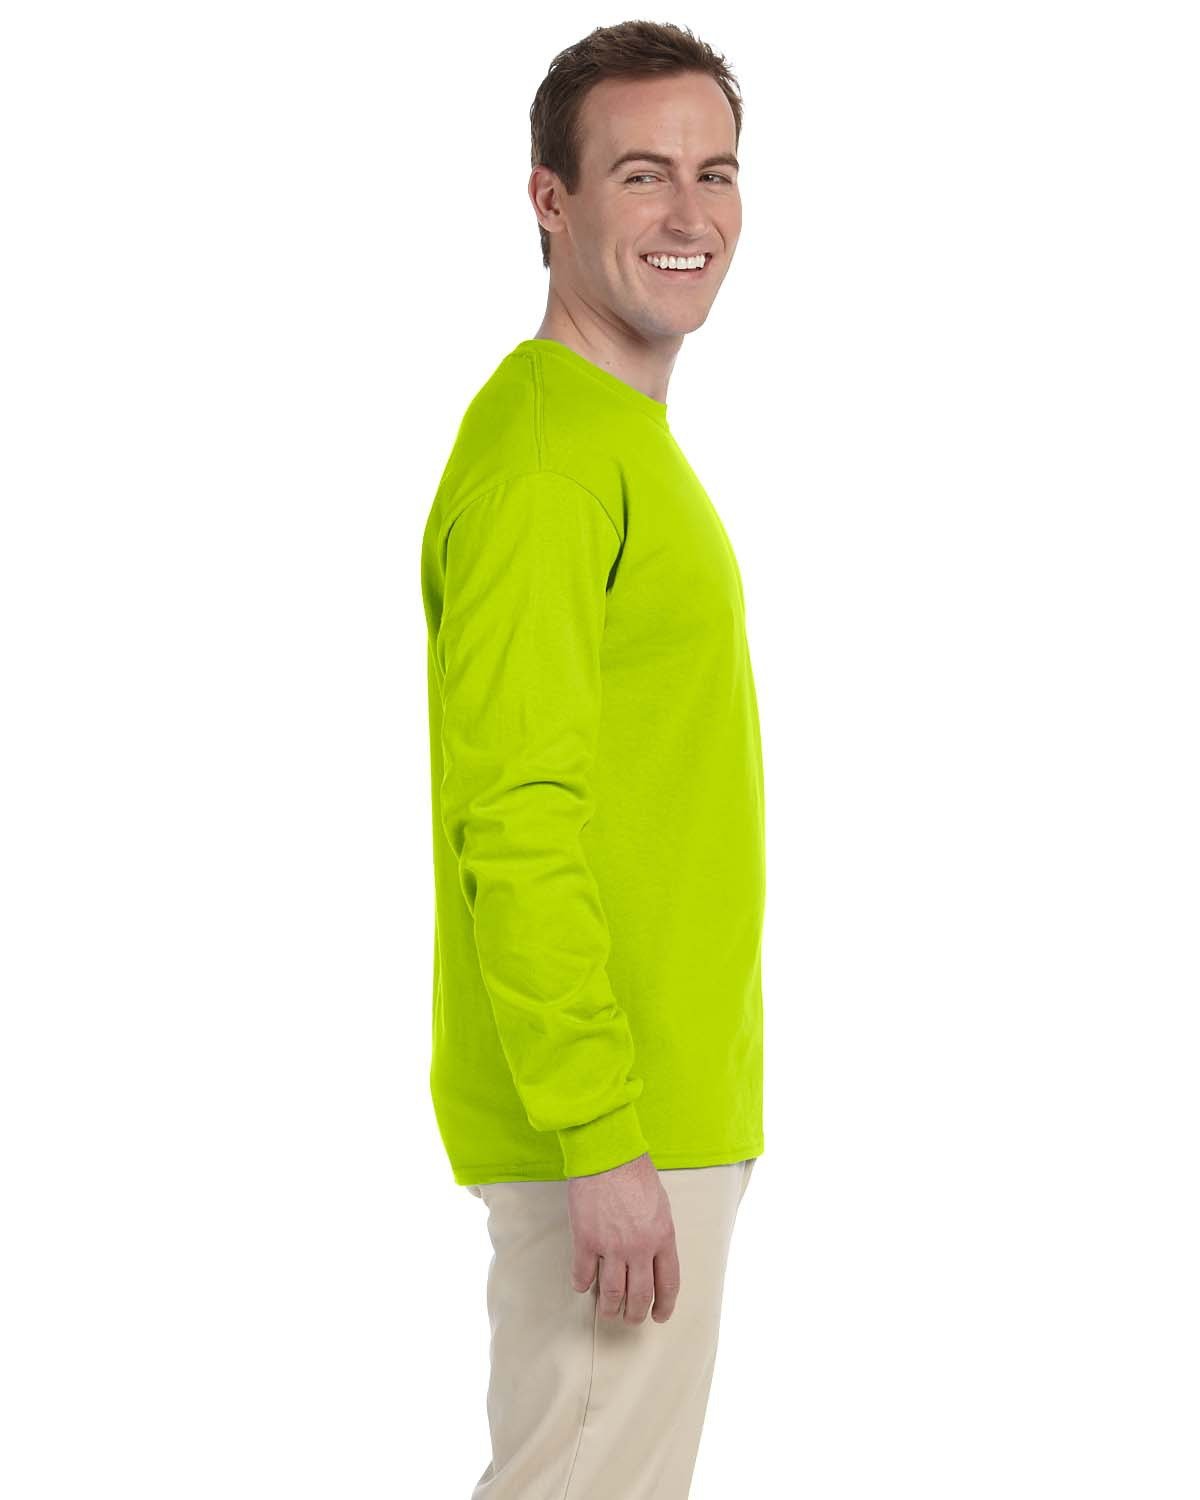 Safety Green Long Sleeve T-Shirt with Pocket - 50/50 Cotton/Poly  (Preshrunk) *Custom Printing Available*